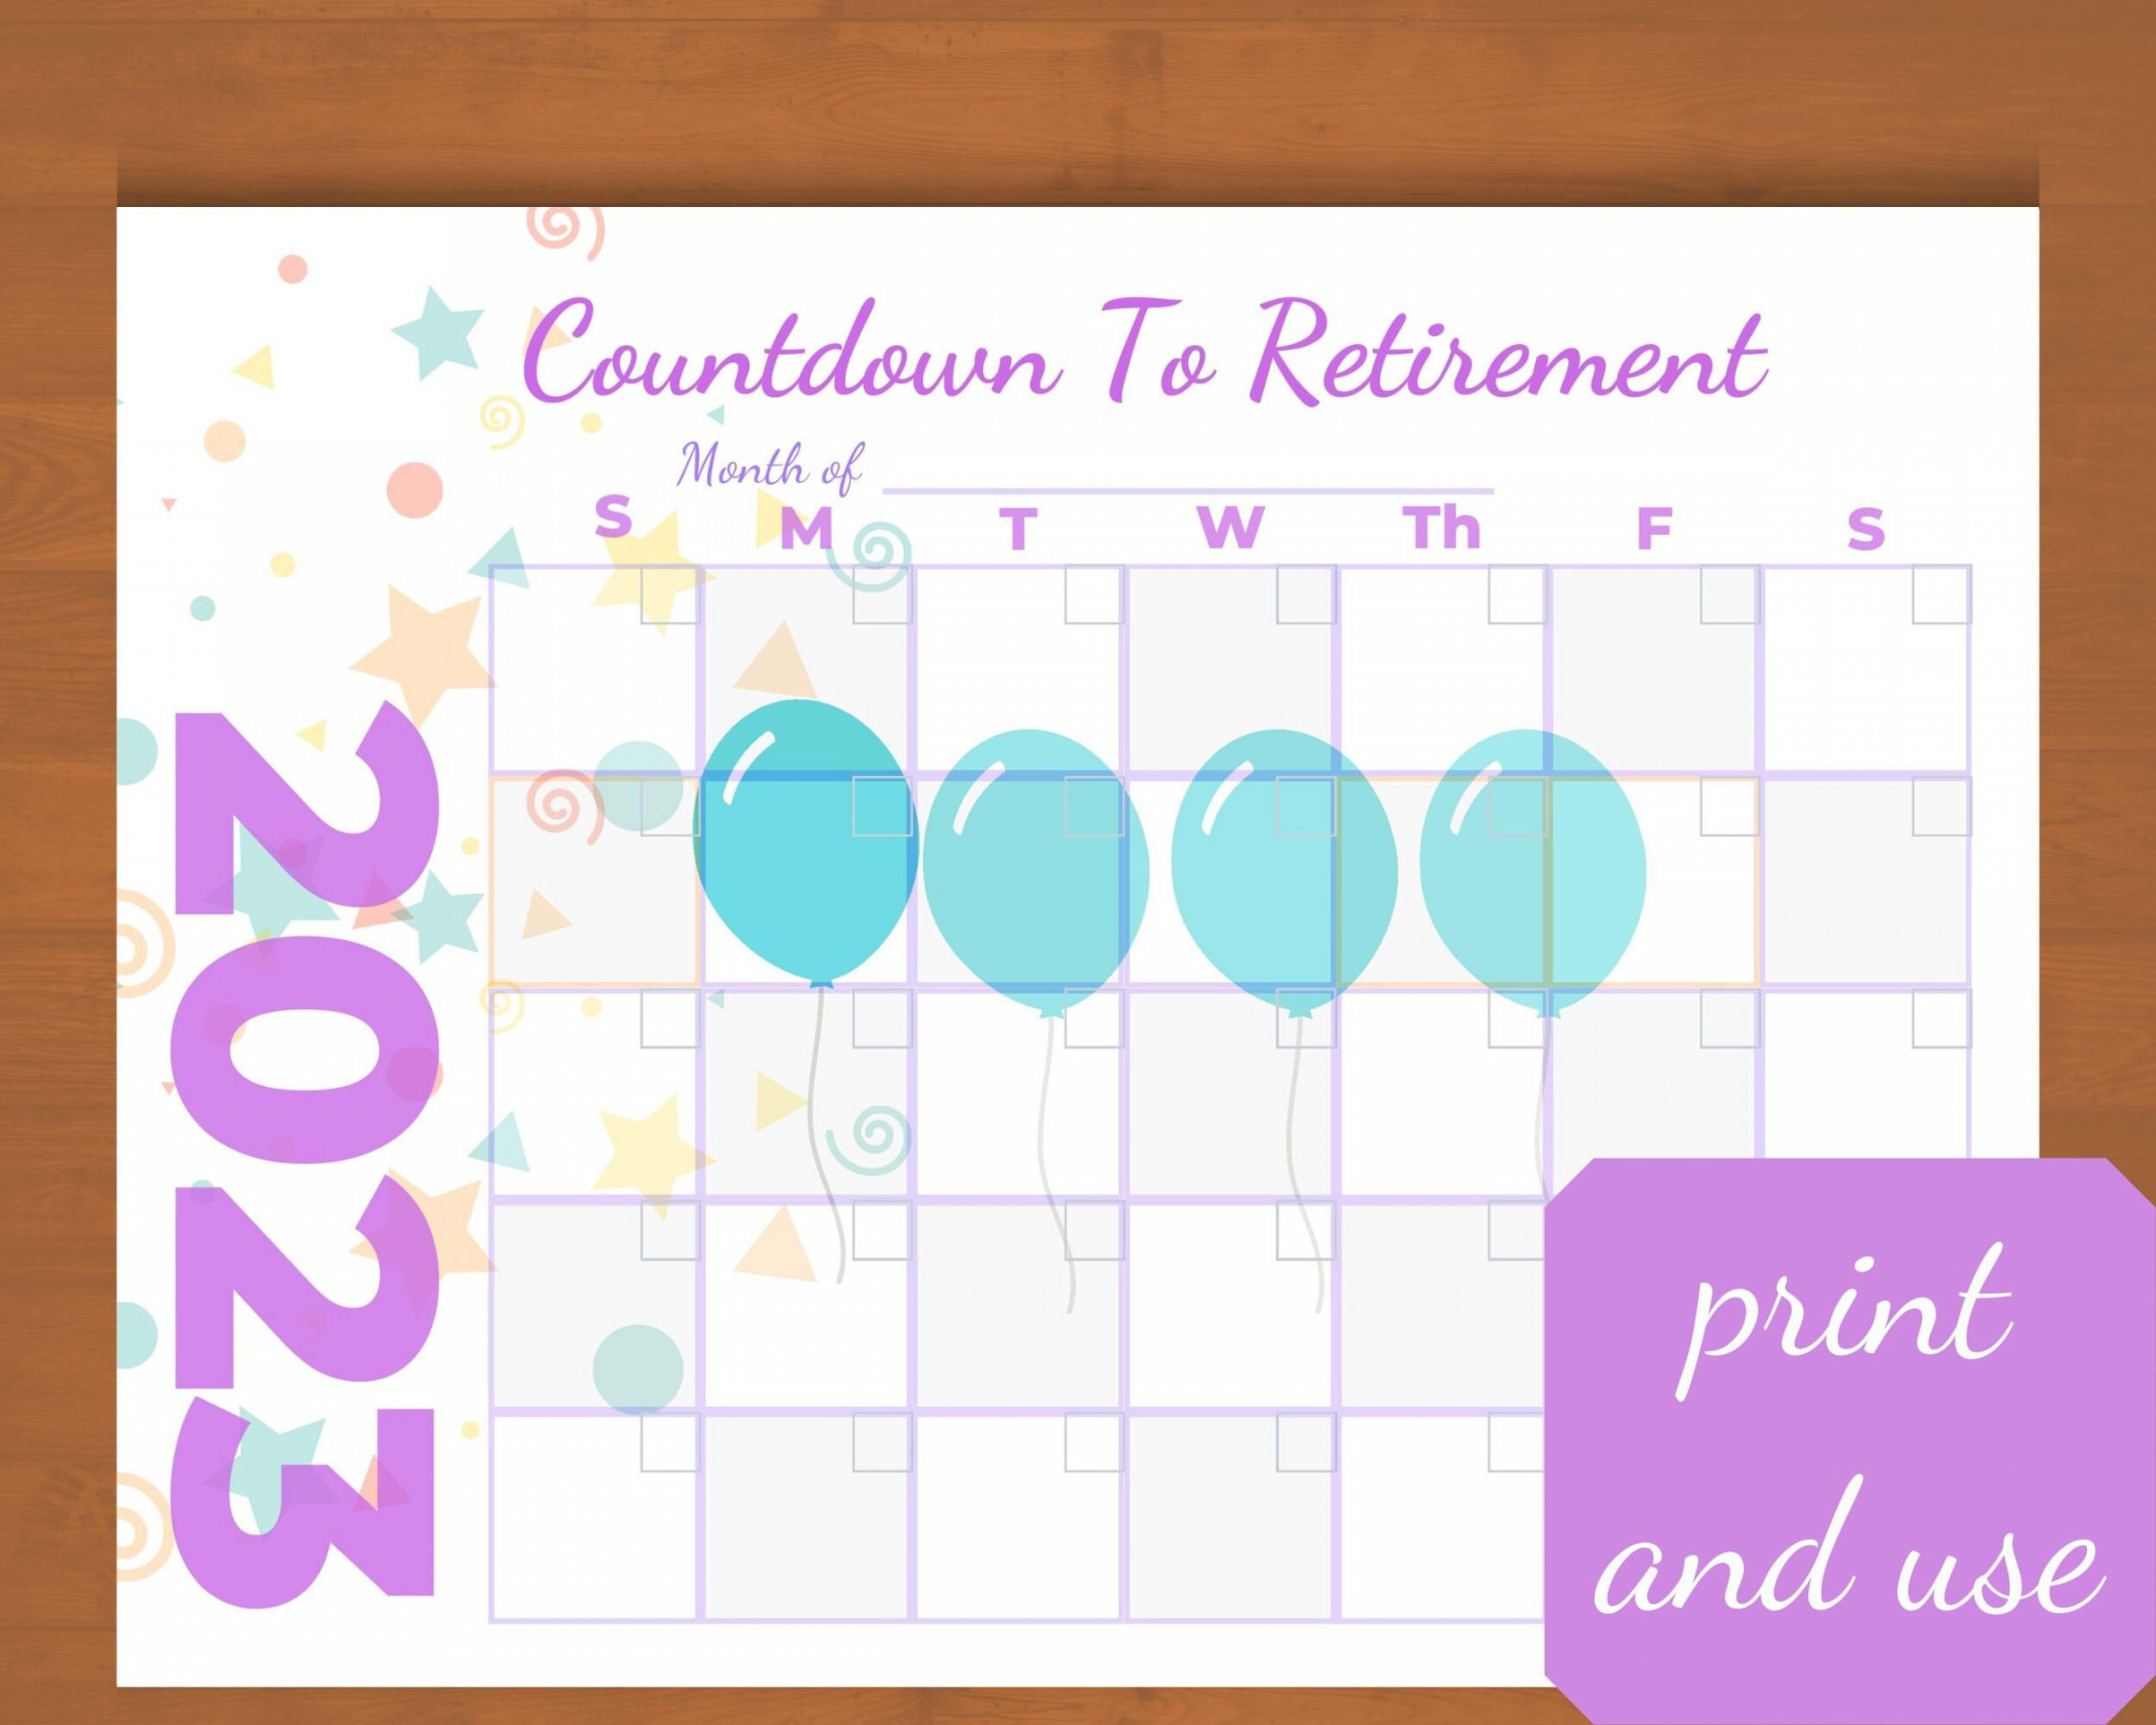 Countdown to Retirement Printable Calendar, Fun Way to Count the